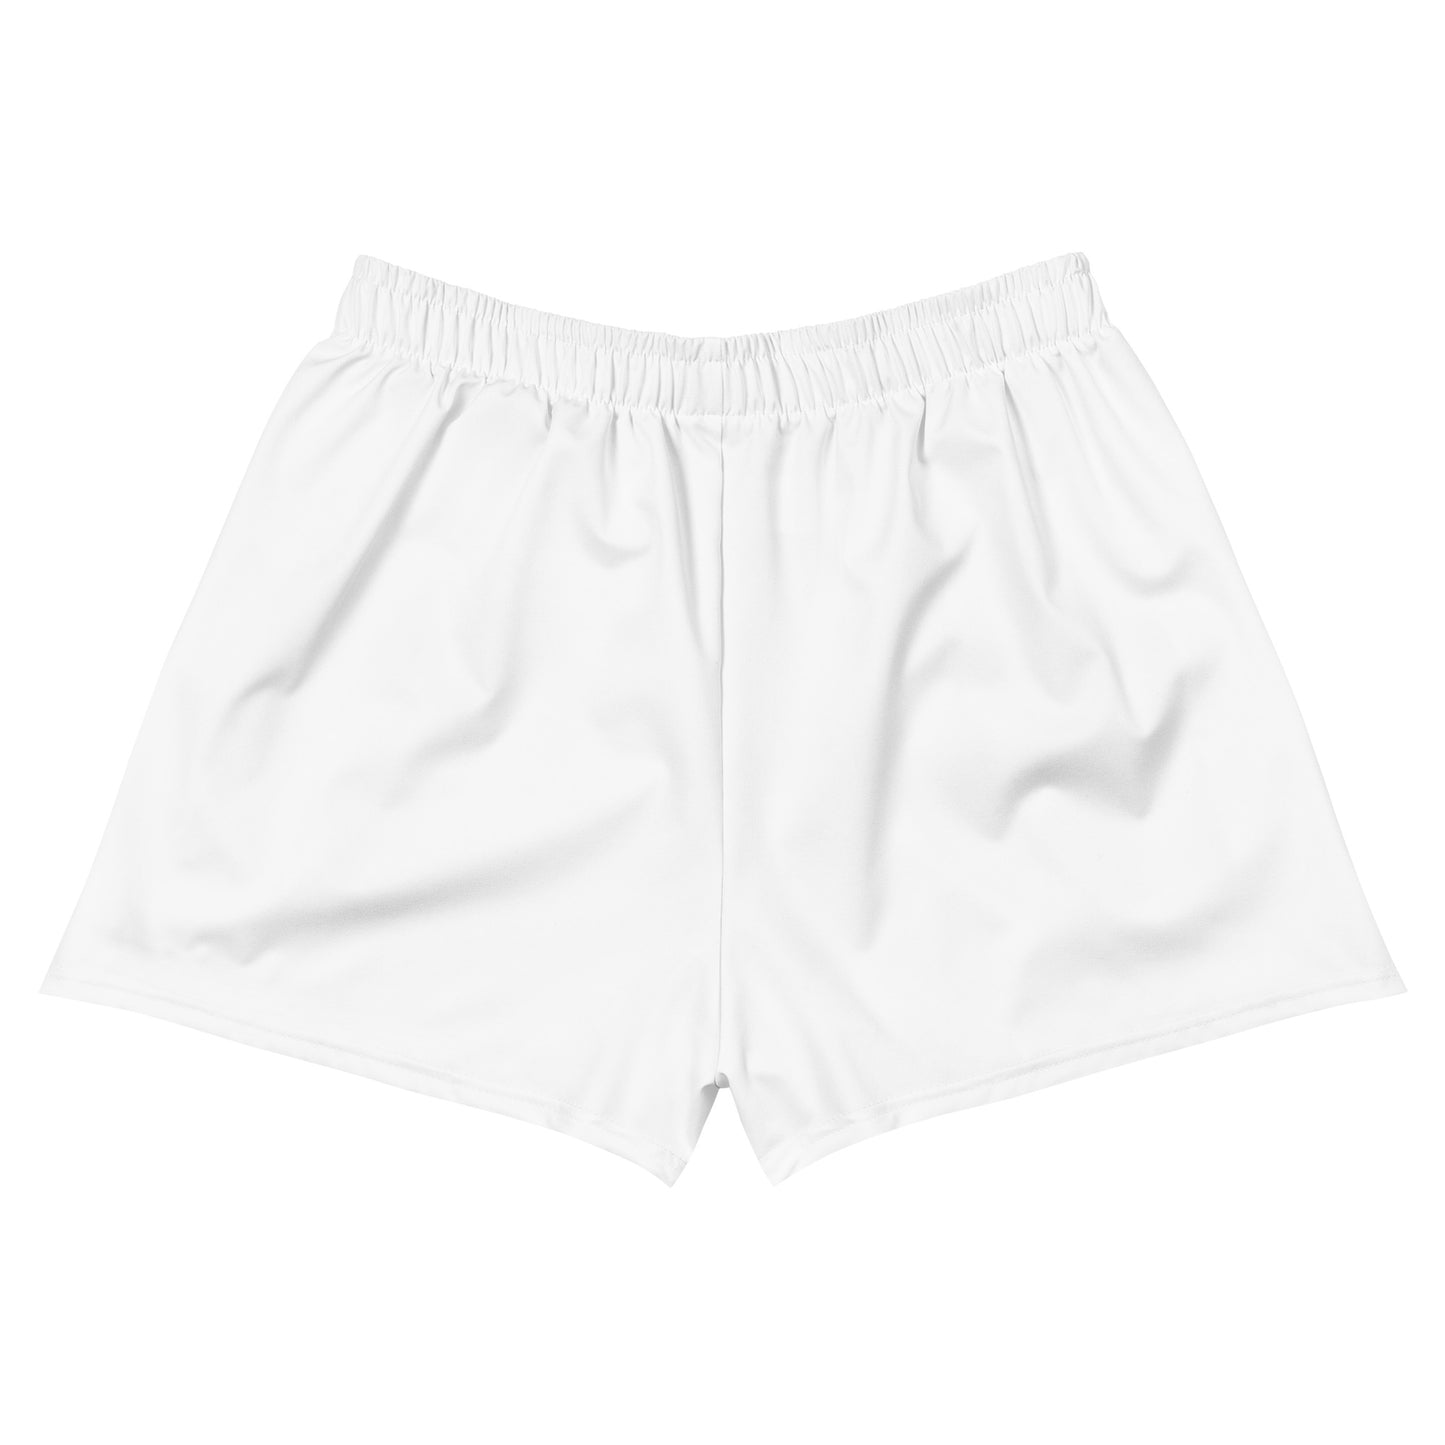 Same Goals Different Struggles White Women’s Recycled Athletic Shorts